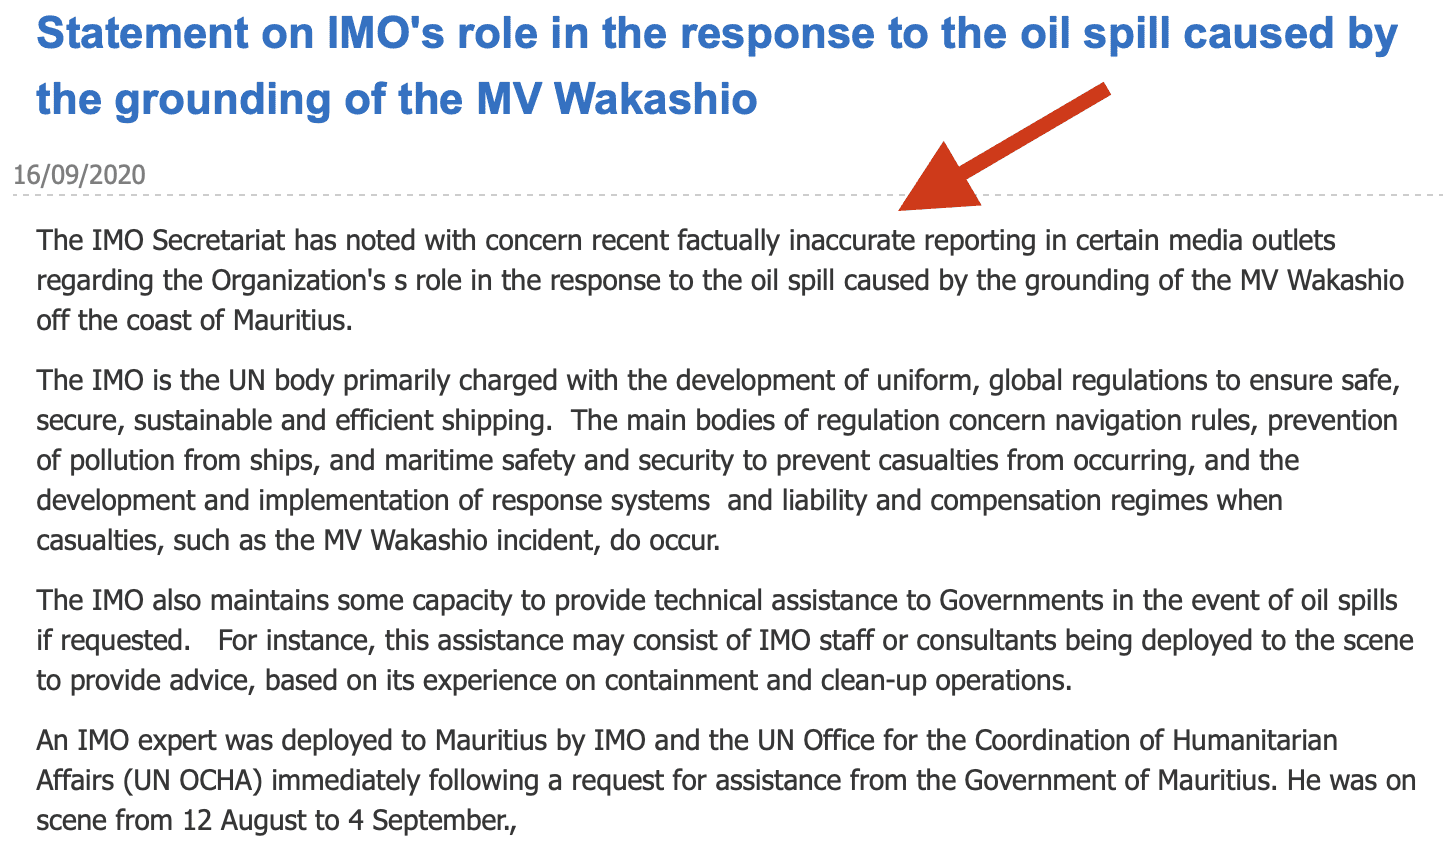 Does The IMO ‘Intend’ To Do Nothing At All?